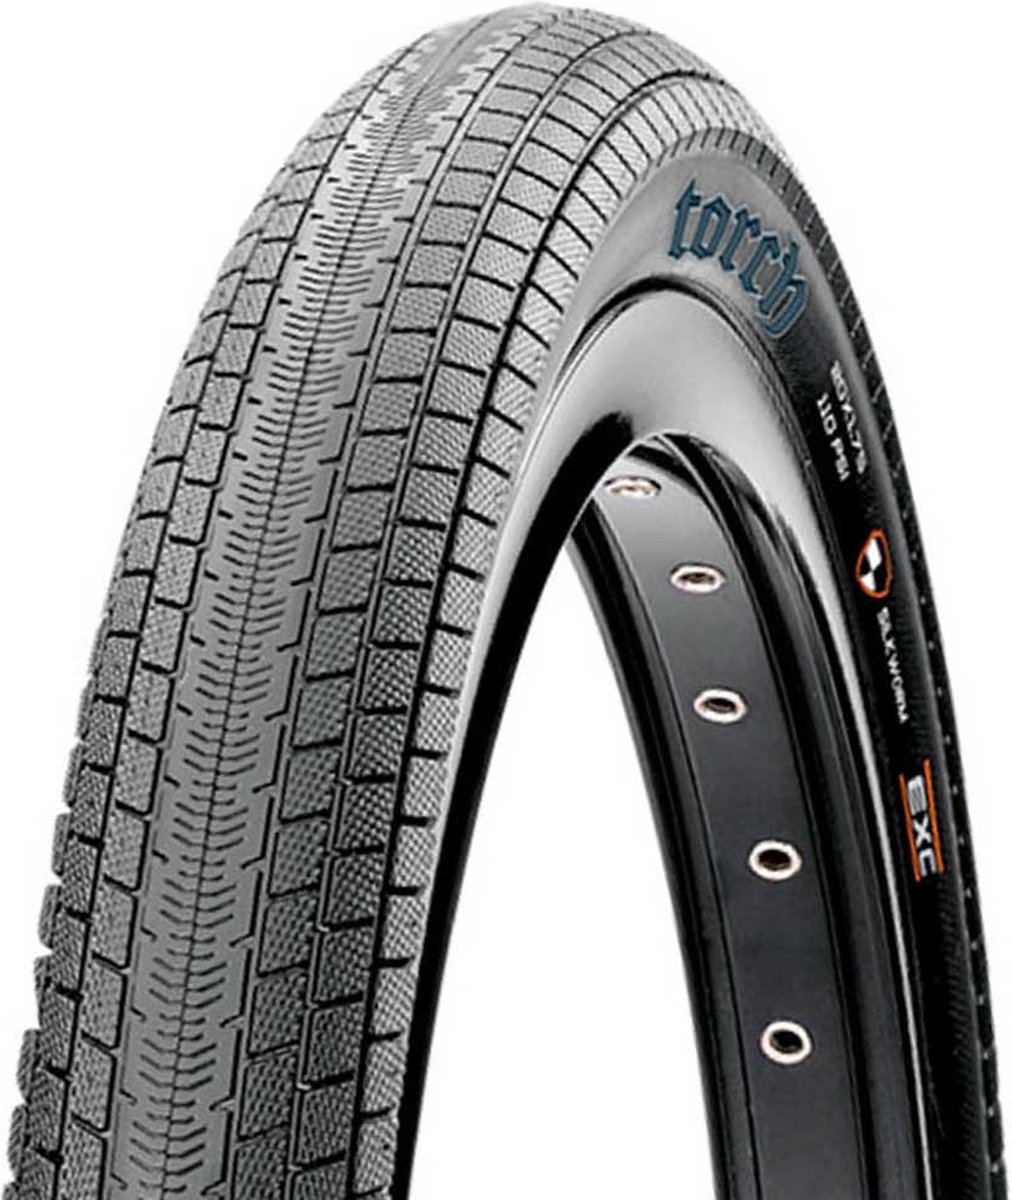 Maxxis Torch Vouwband 20x1.75